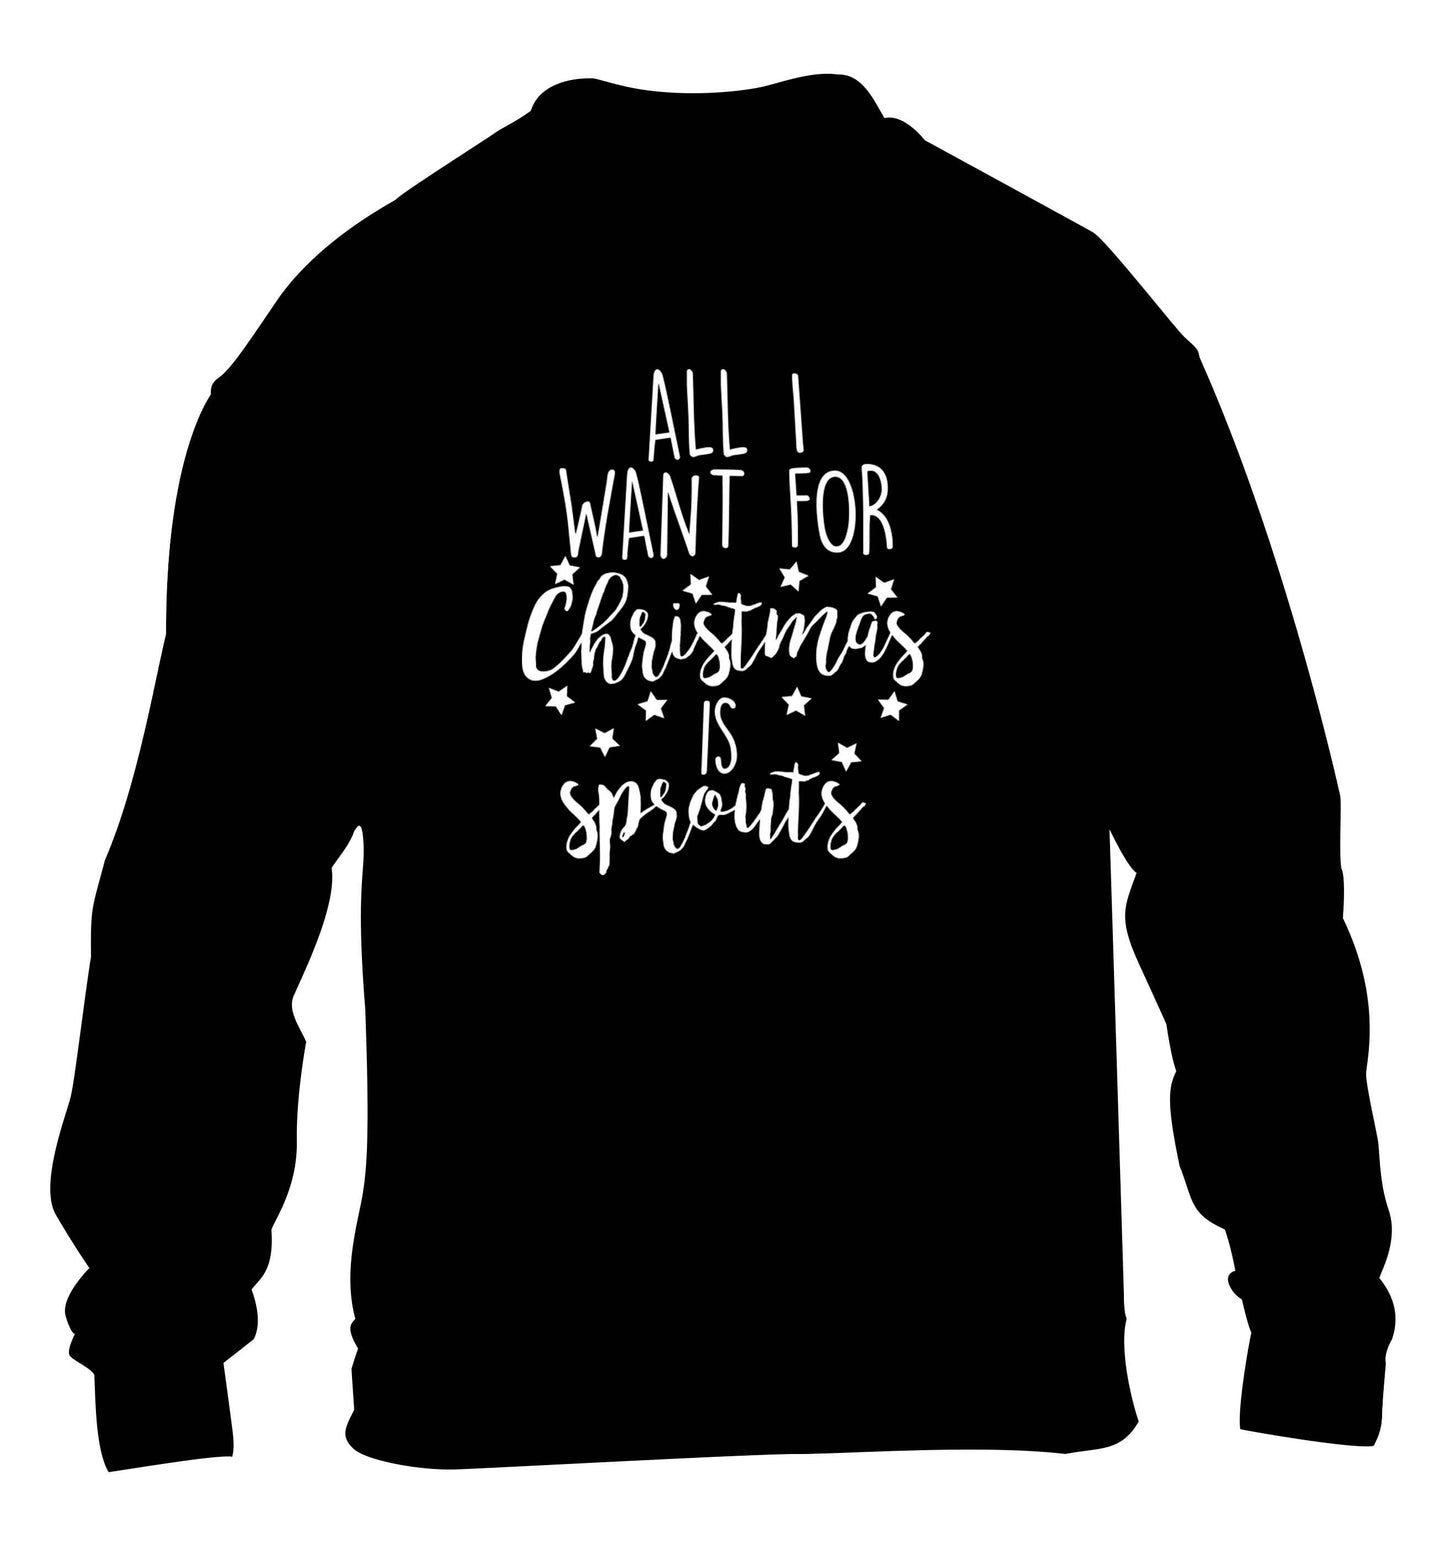 All I want for Christmas is sprouts children's black sweater 12-13 Years